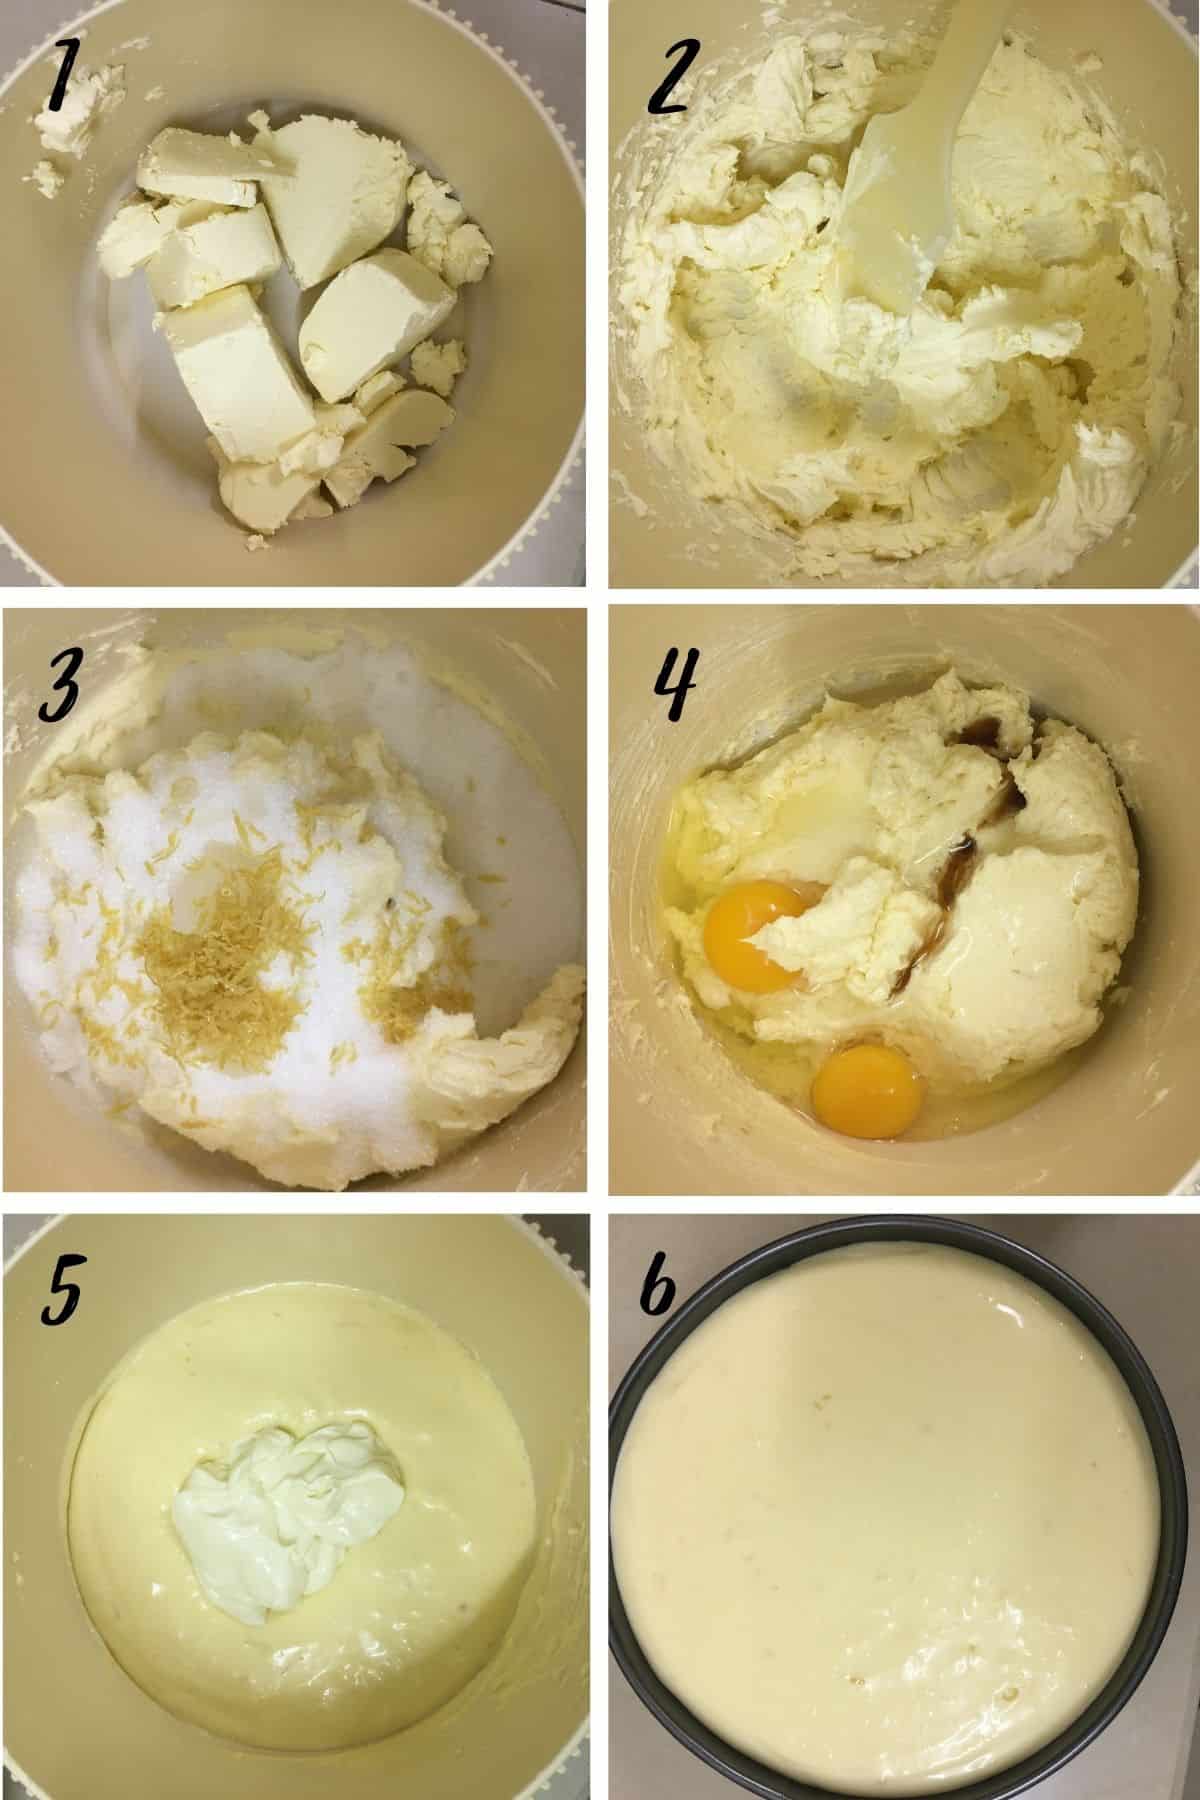 A poster of 6 images showing how to mix cheesecake batter.